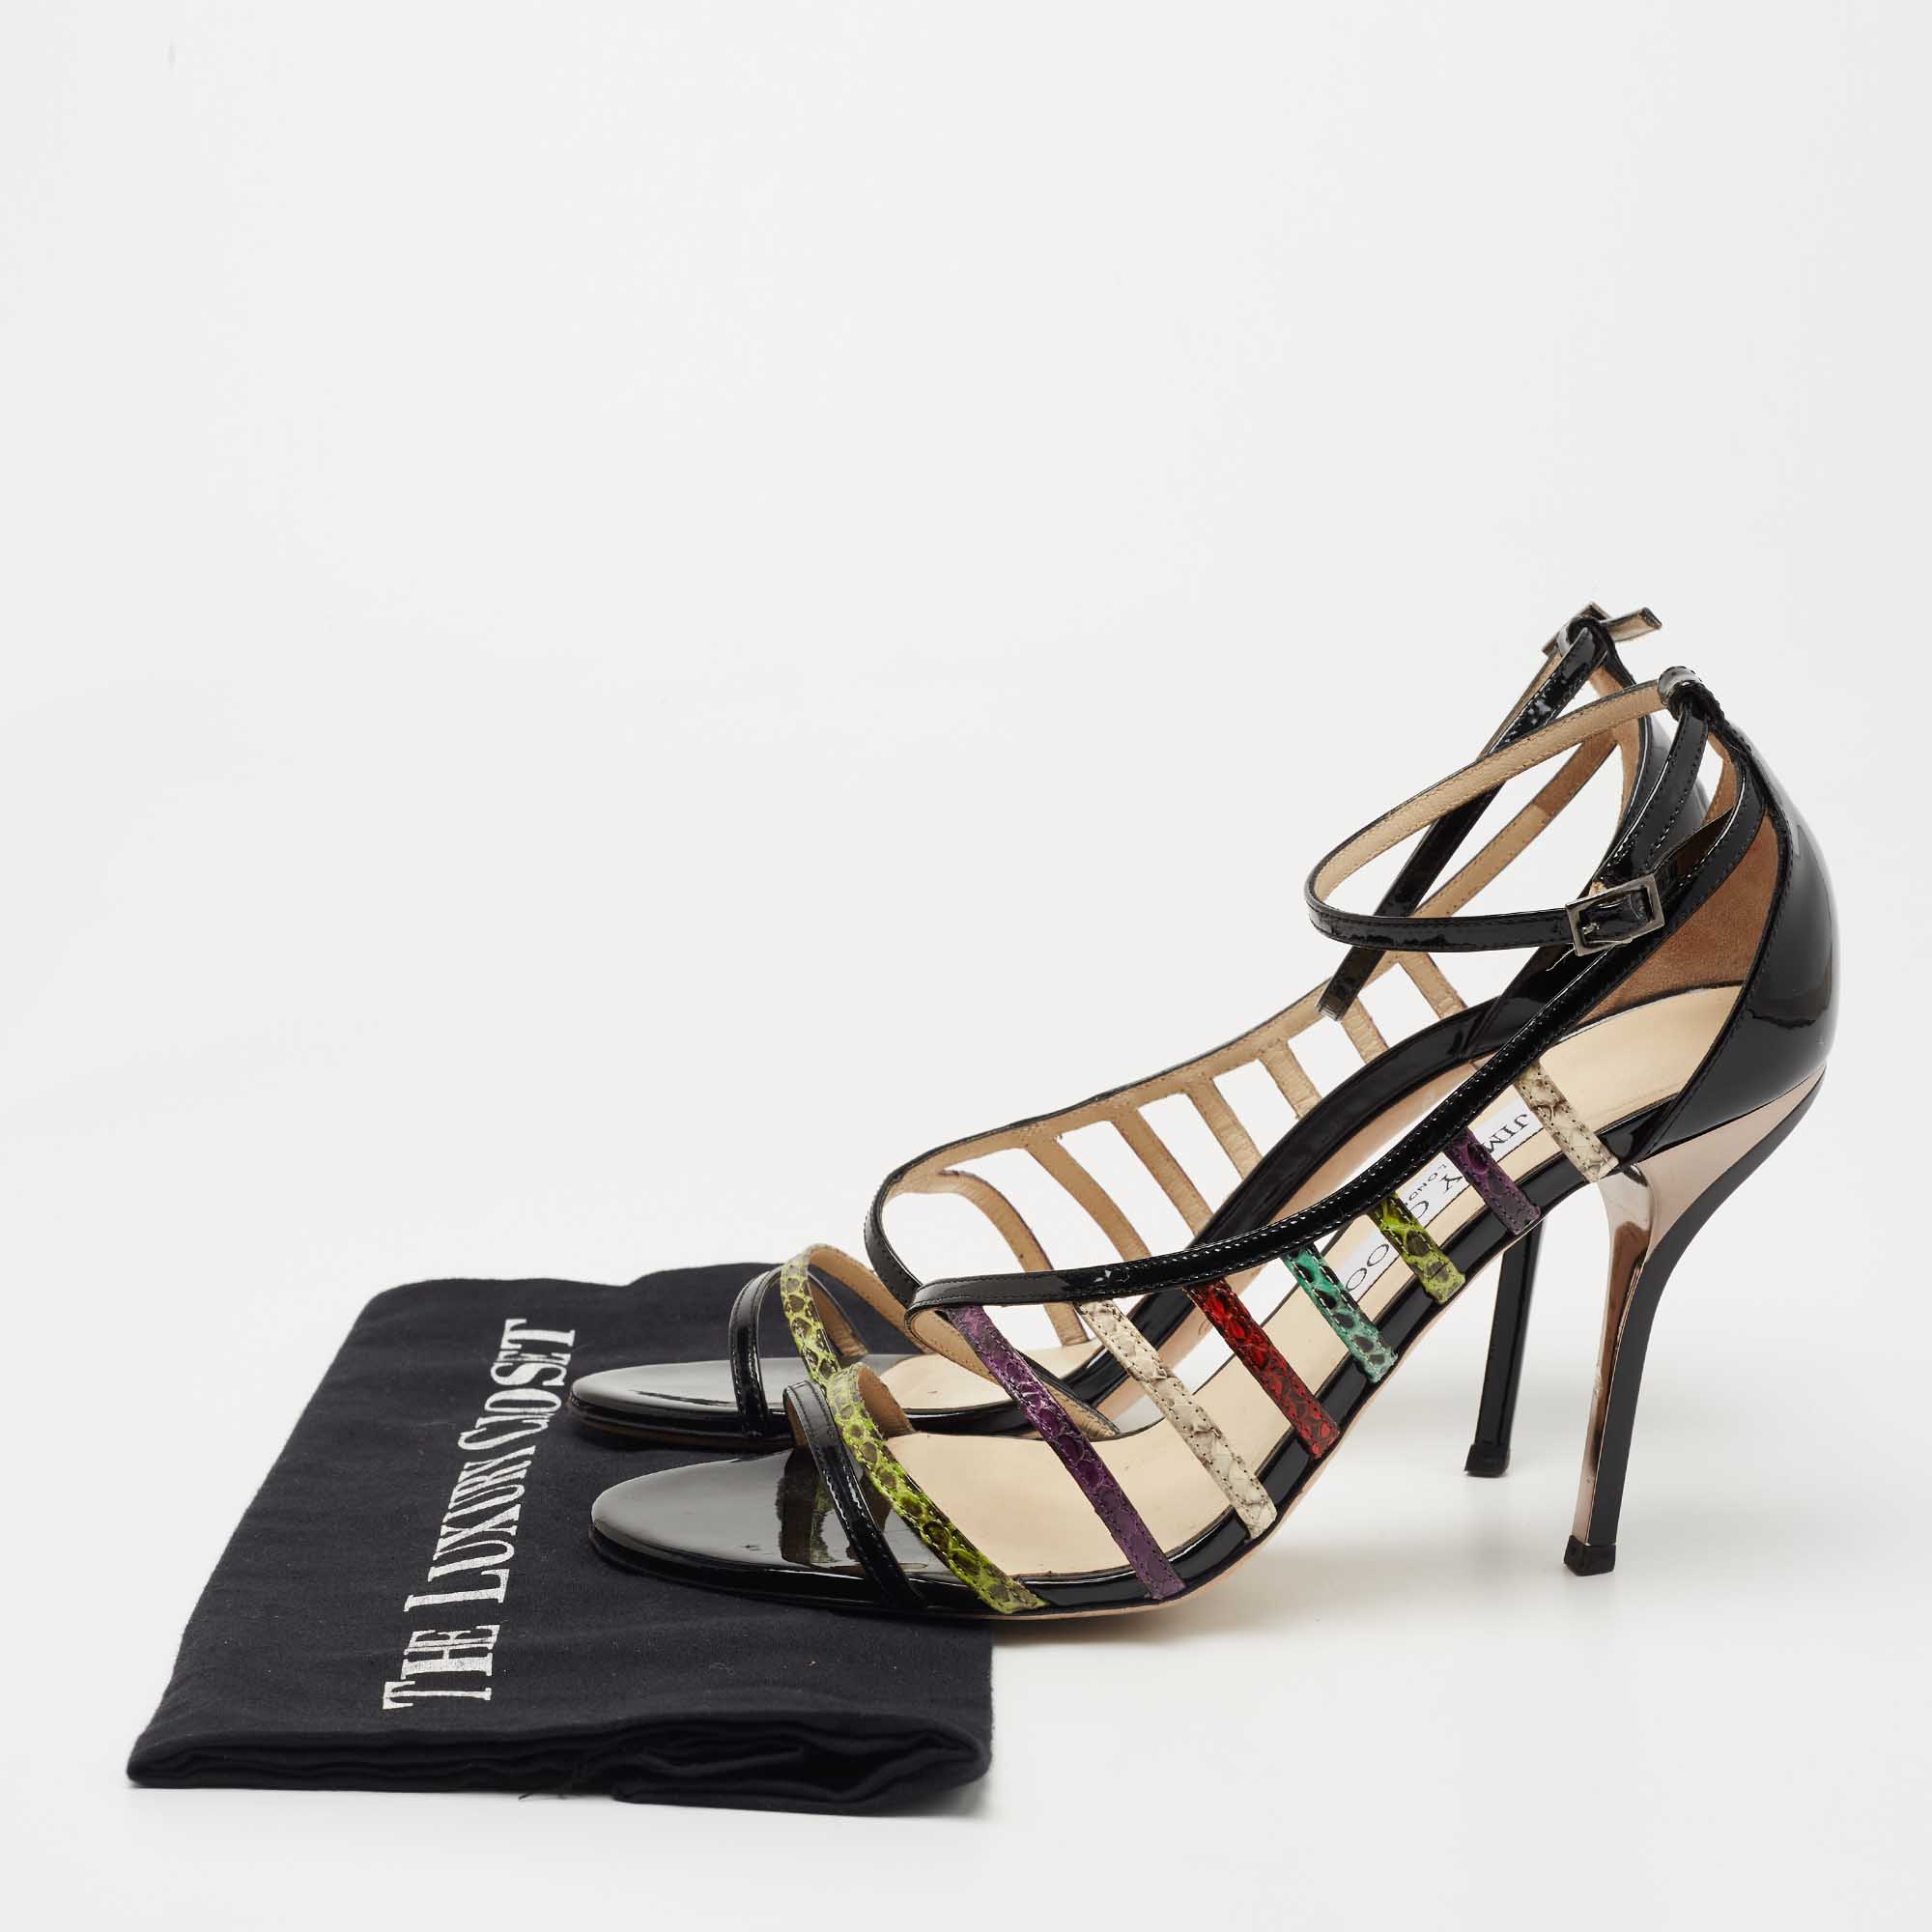 Jimmy Choo Multicolor Patent And Water Snakeskin Sandals Size 39.5